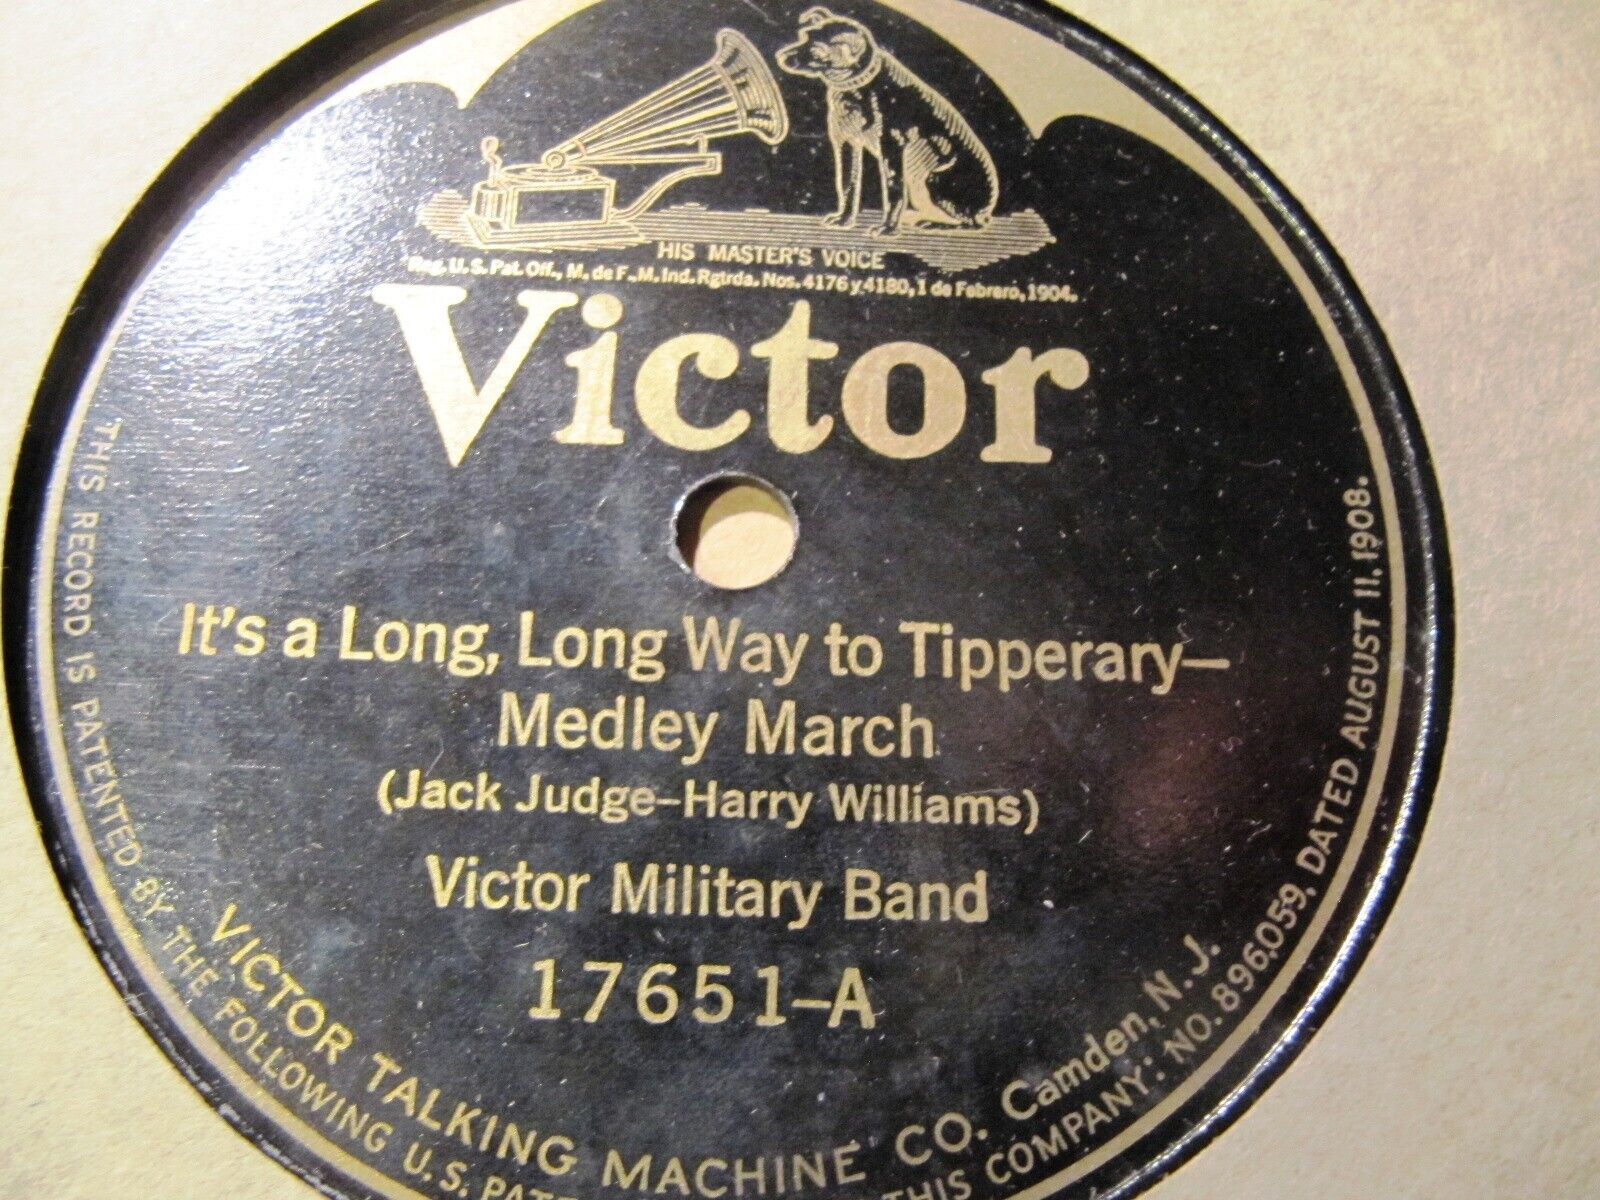 WW1 IT\'s A LONG WAY TO TIPPERARY Private Tommy Atkins VICTOR MILITARY BAND 17651